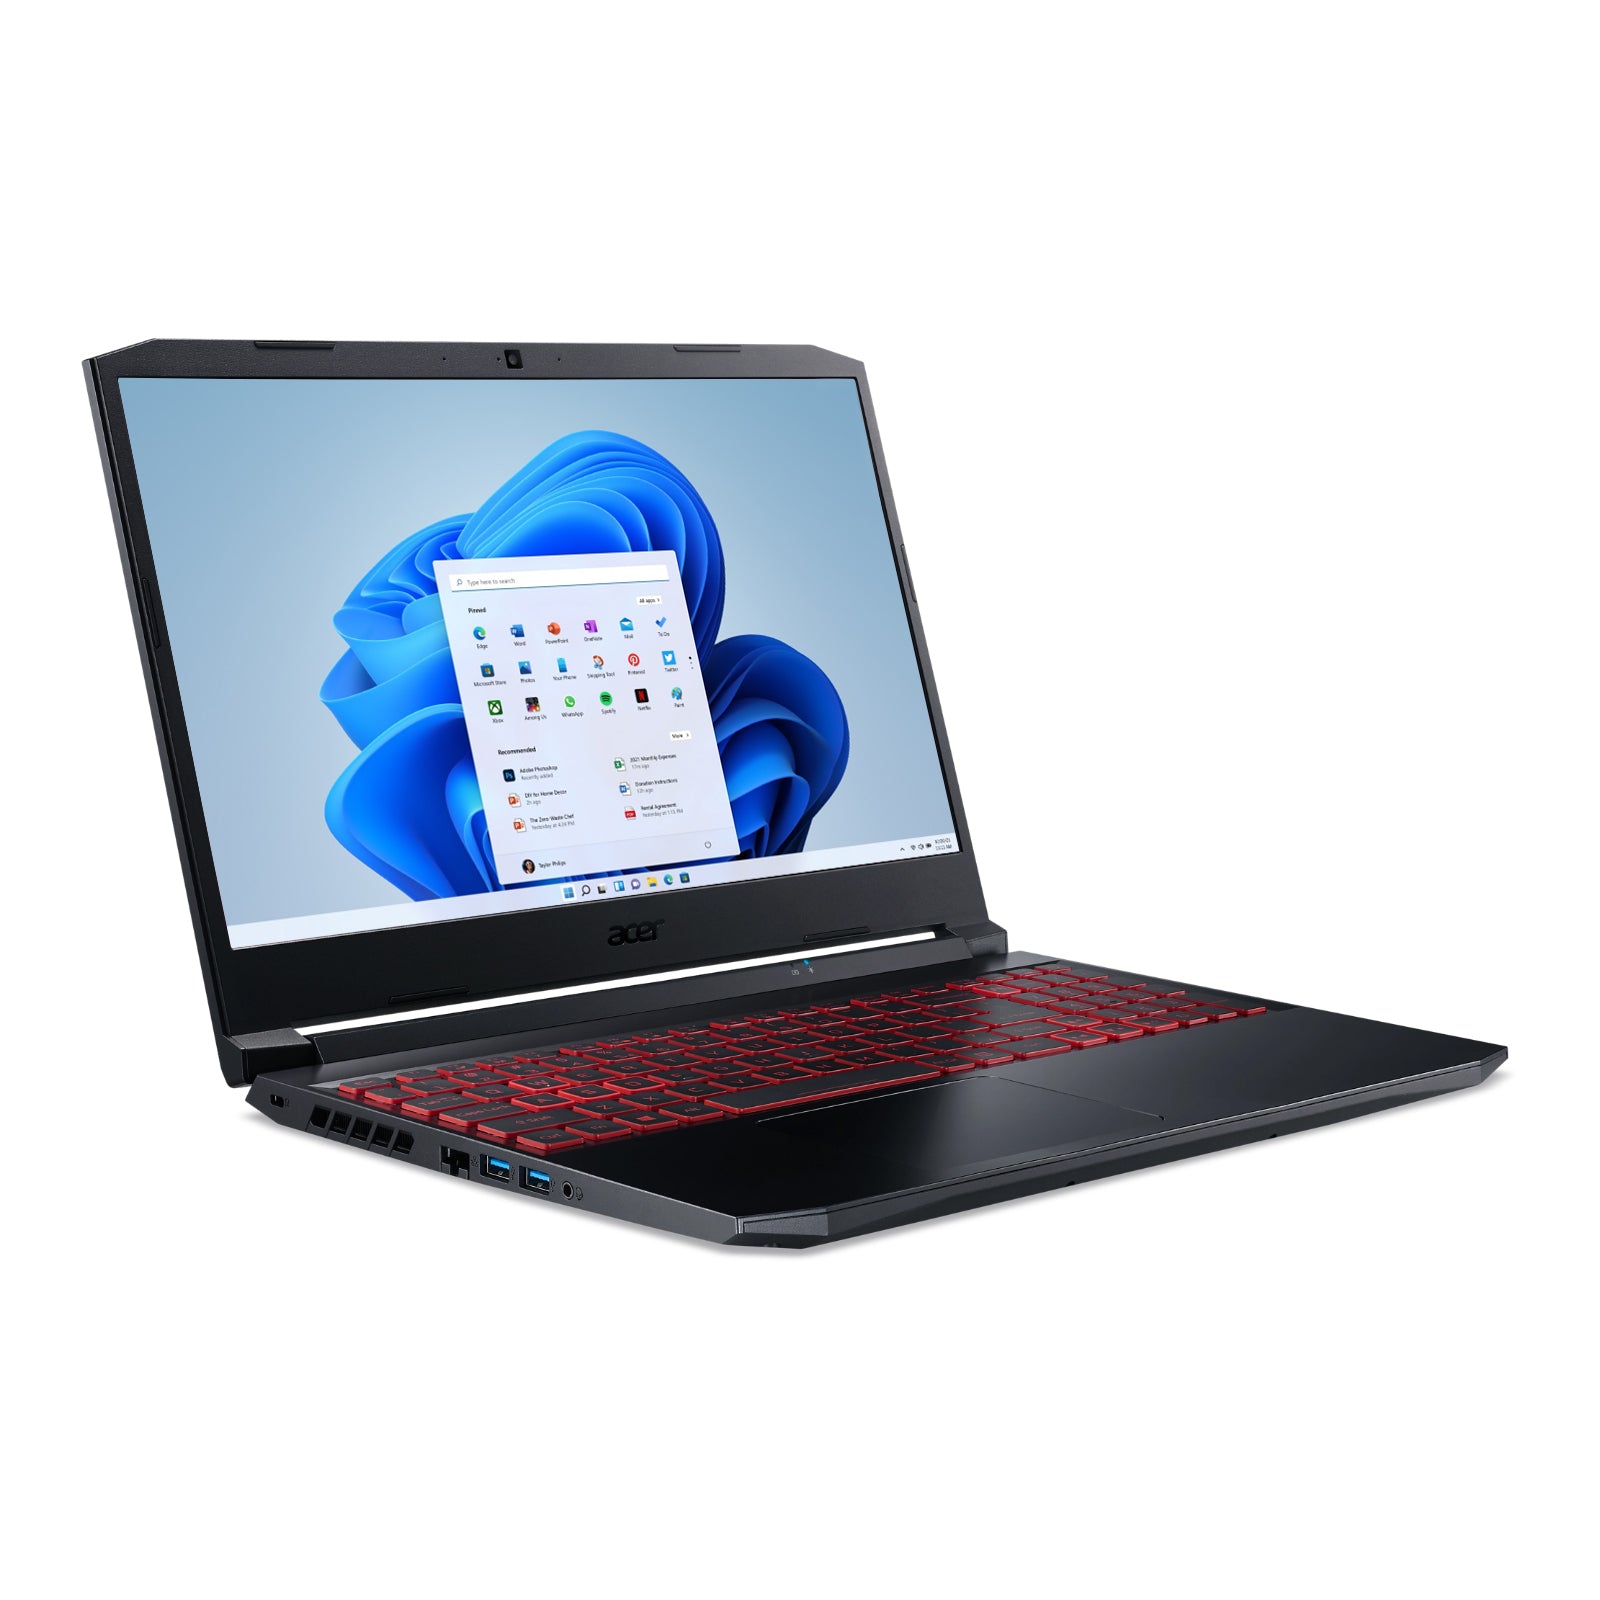 Acer Nitro 5 AN515-57-919C i9-11900H RTX 3060 144HZ Gaming Laptop Offers (Brand New) Gaming laptop, Graphic Design laptop, best laptop for gaming, Best laptop for graphic design, computer for sale Lebanon, laptop for video editing in Lebanon, laptop for sale Lebanon, Best graphic design laptop,	Best video editing laptop, Best programming laptop, laptop for sale in Lebanon, laptops for sale in Lebanon, laptop for sale in Lebanon, buy computer Lebanon, buy laptop Lebanon.